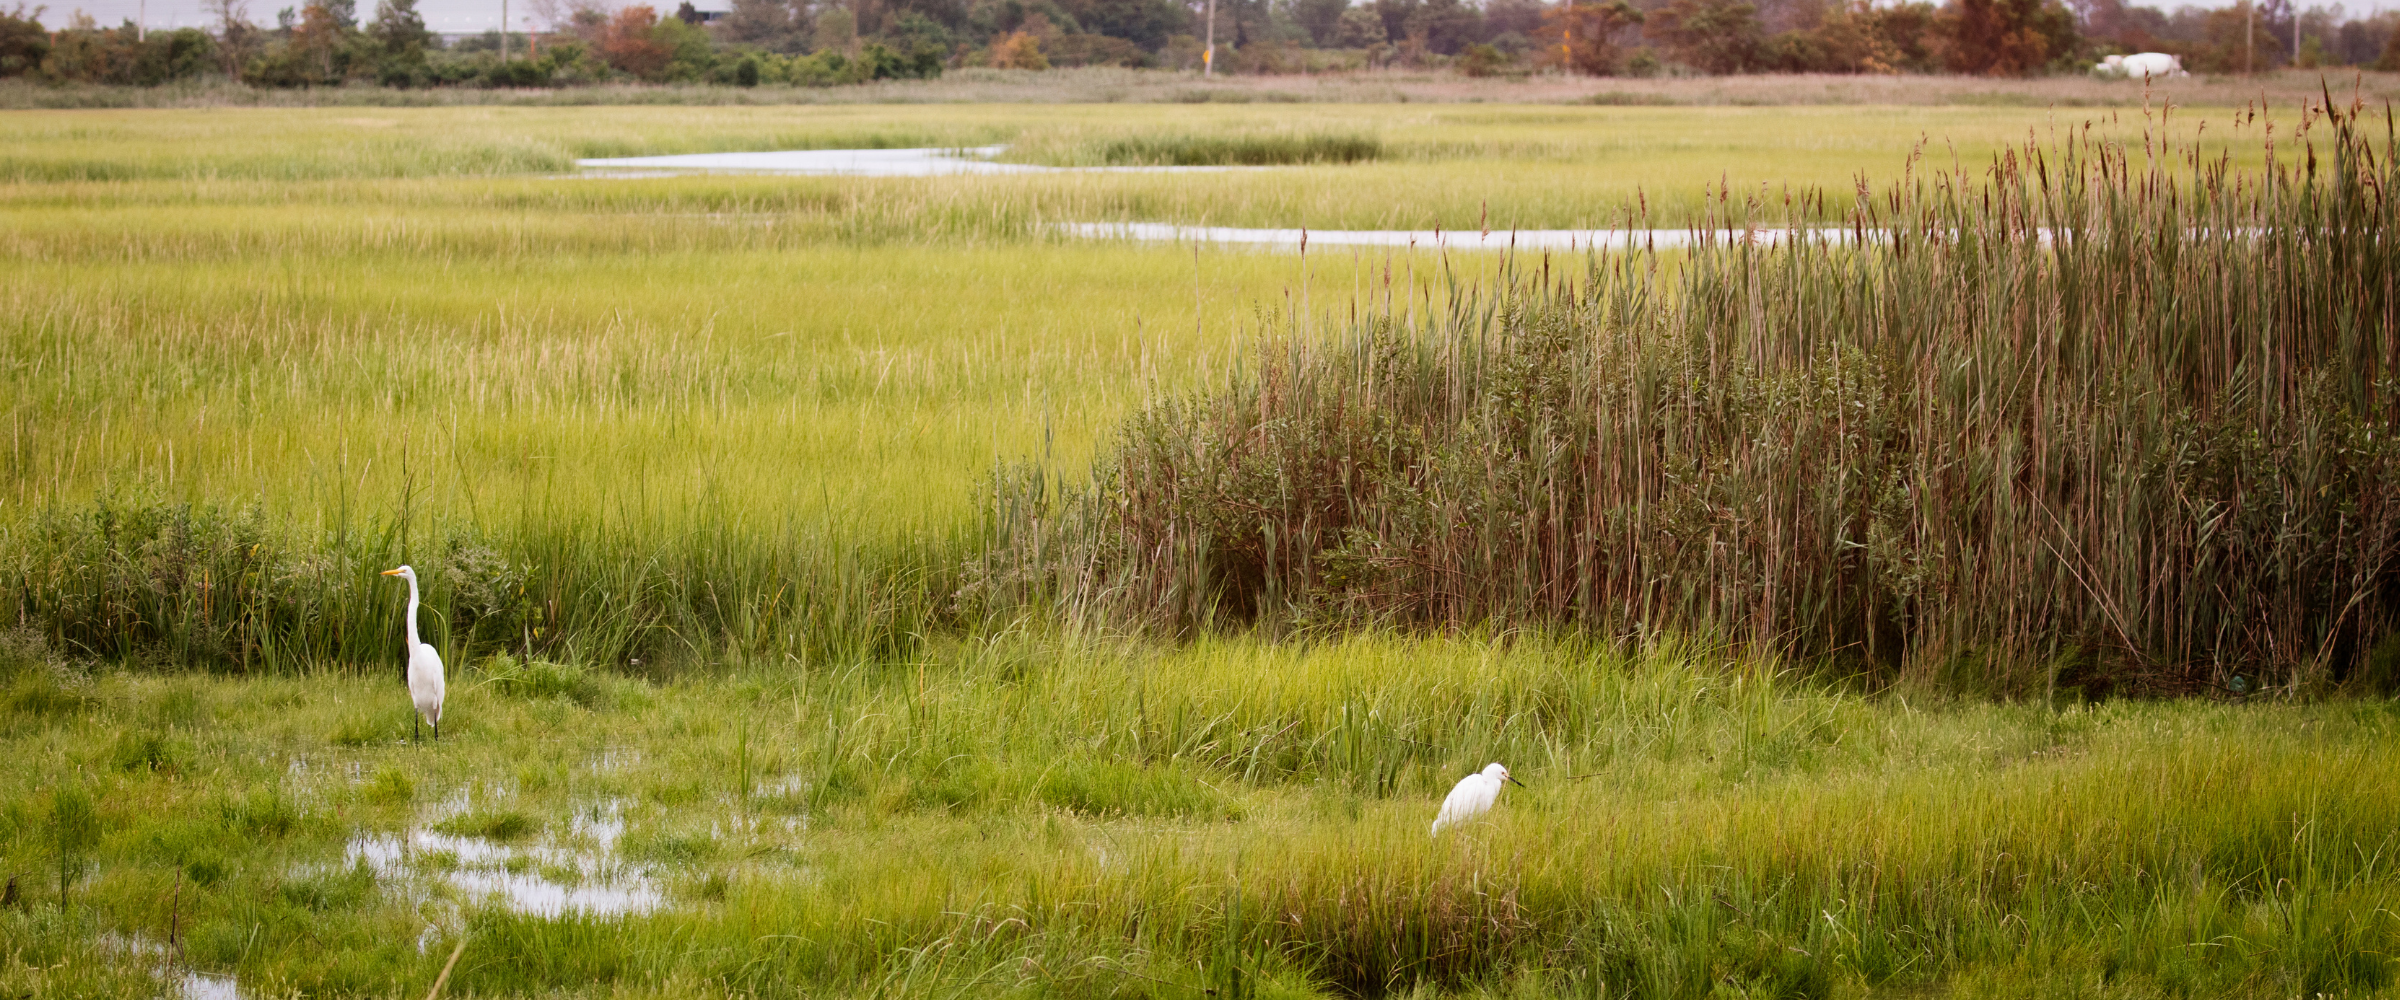 Salt marsh at Idlewild Park, Queens. You can see two Great Egrets in the green grasses.